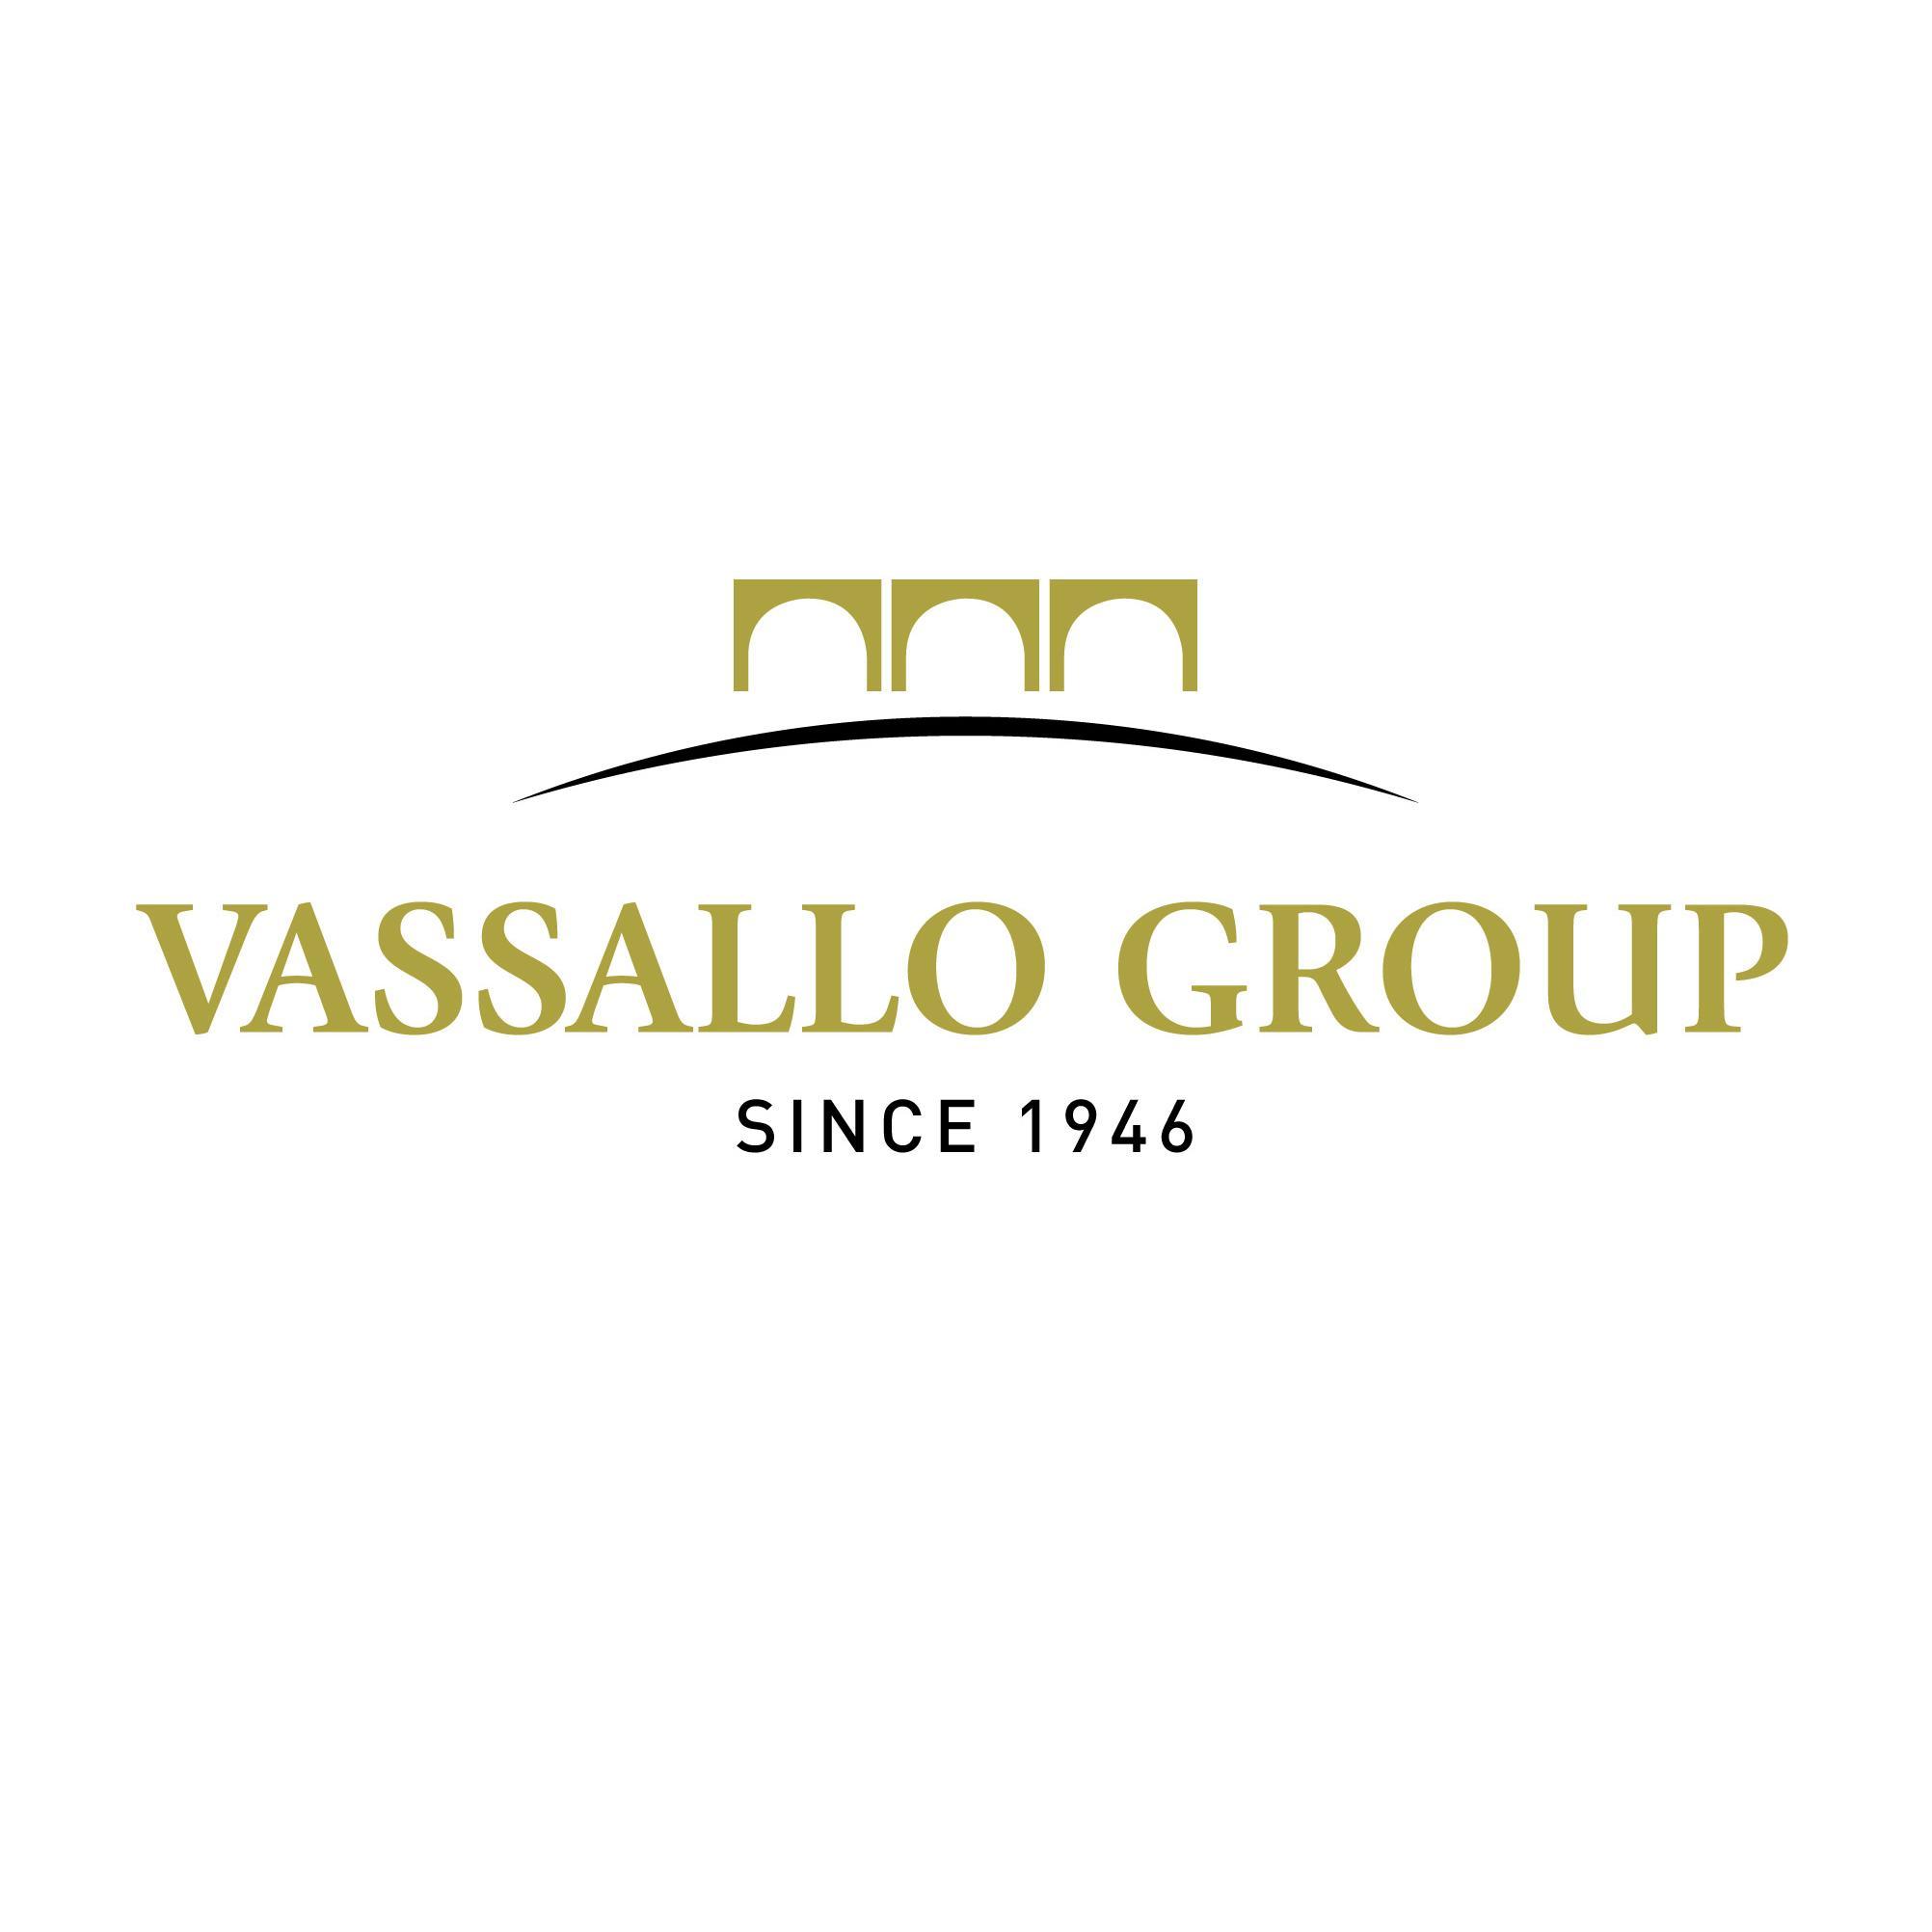 Welcome to Vassallo Group of Companies - one of the leading group of companies in Malta.